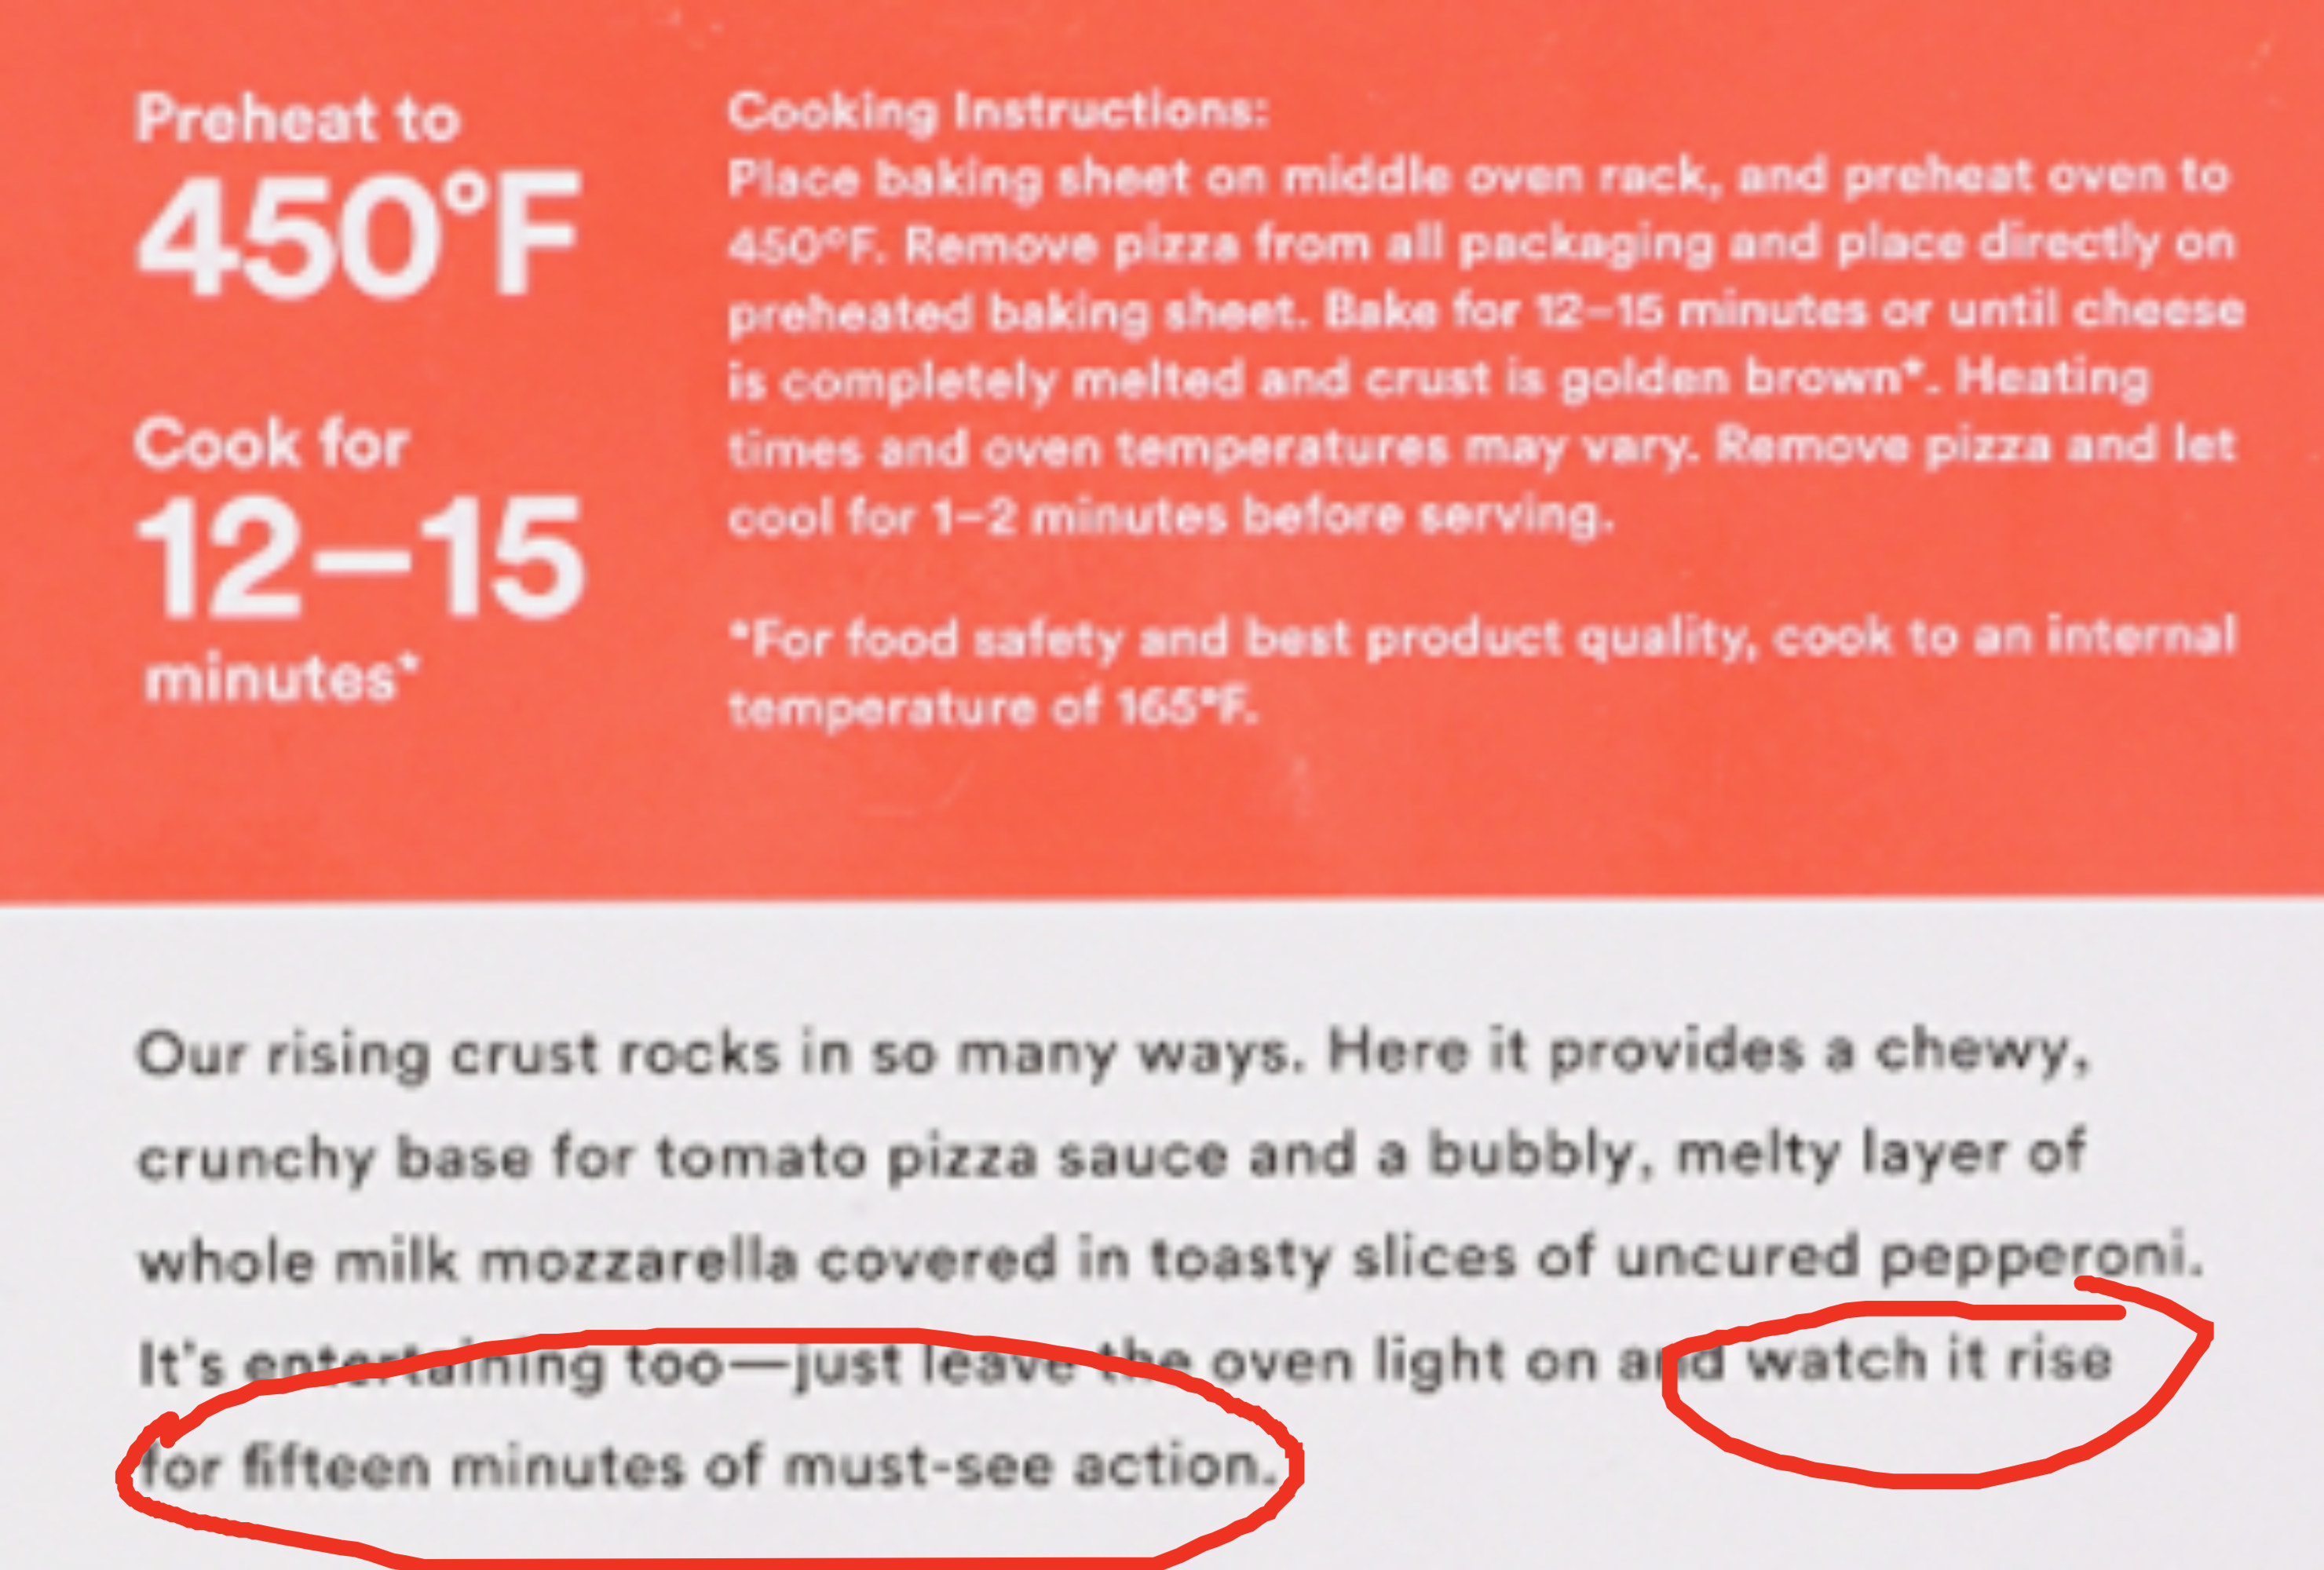 Pizza instructions with &quot;watch it rise for fifteen minutes of must-see action&quot; circled